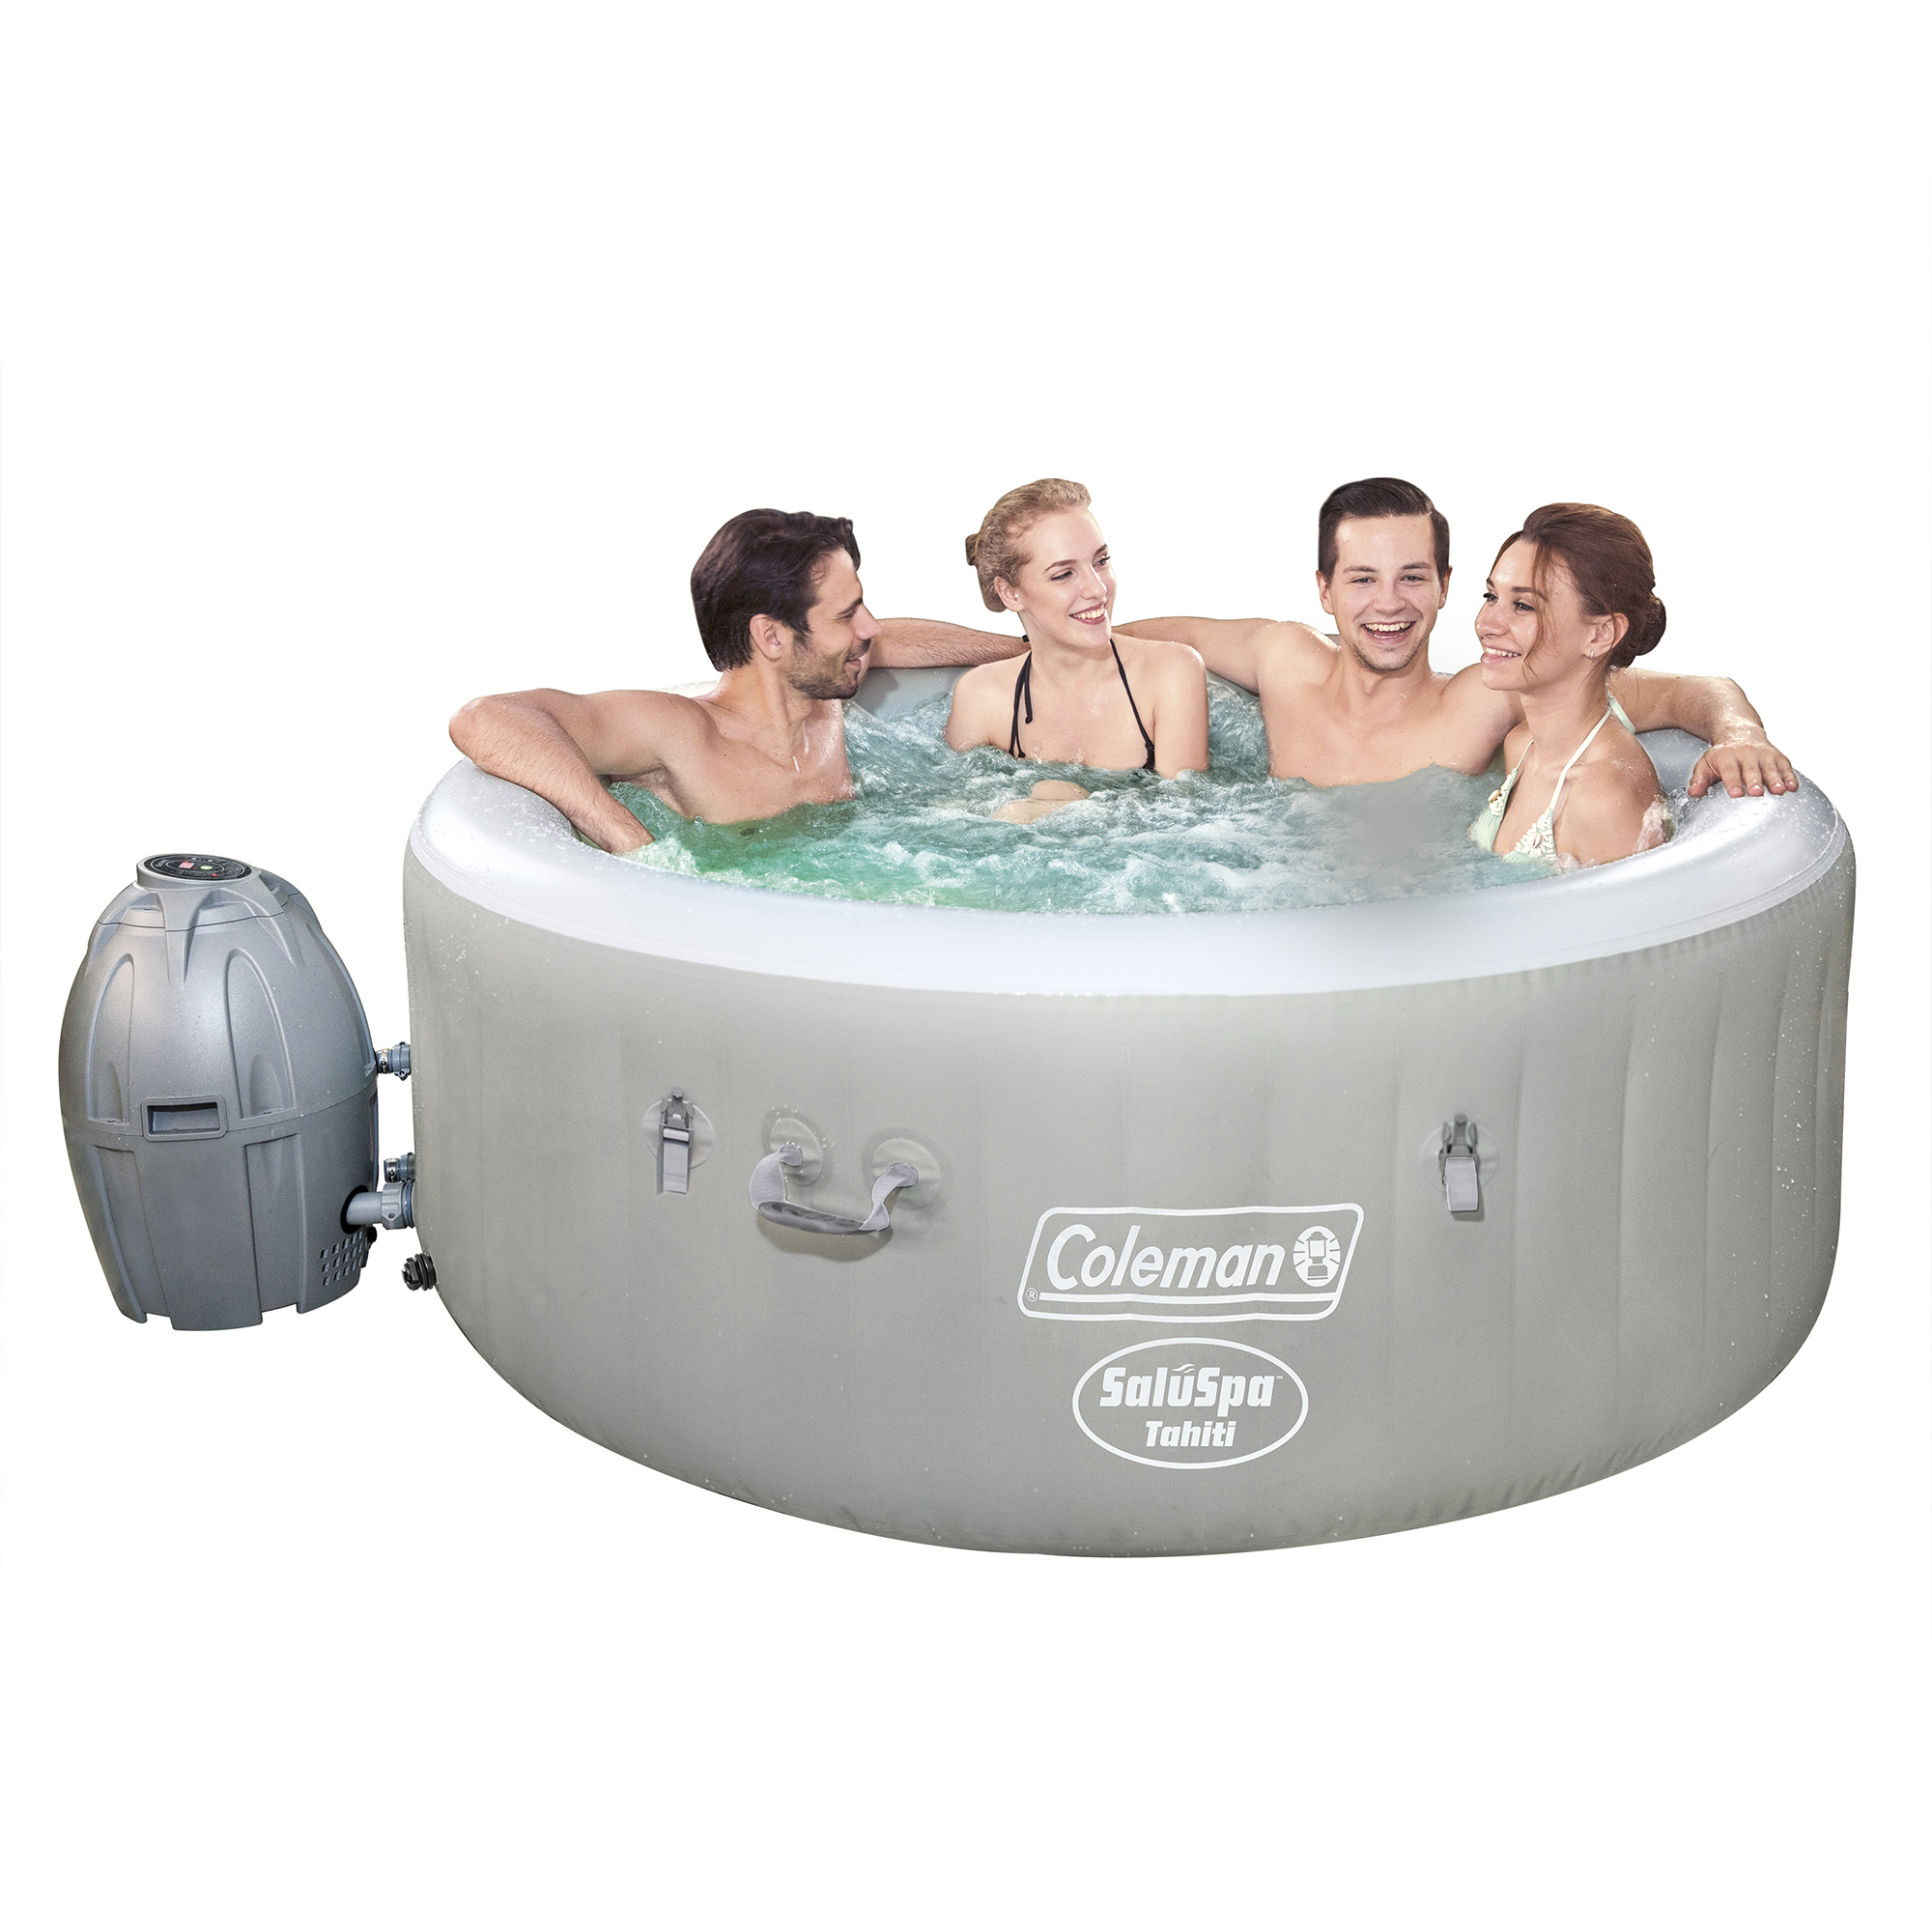 6 Best Coleman Hot Tub Reviews 2020 (Update from 2020)